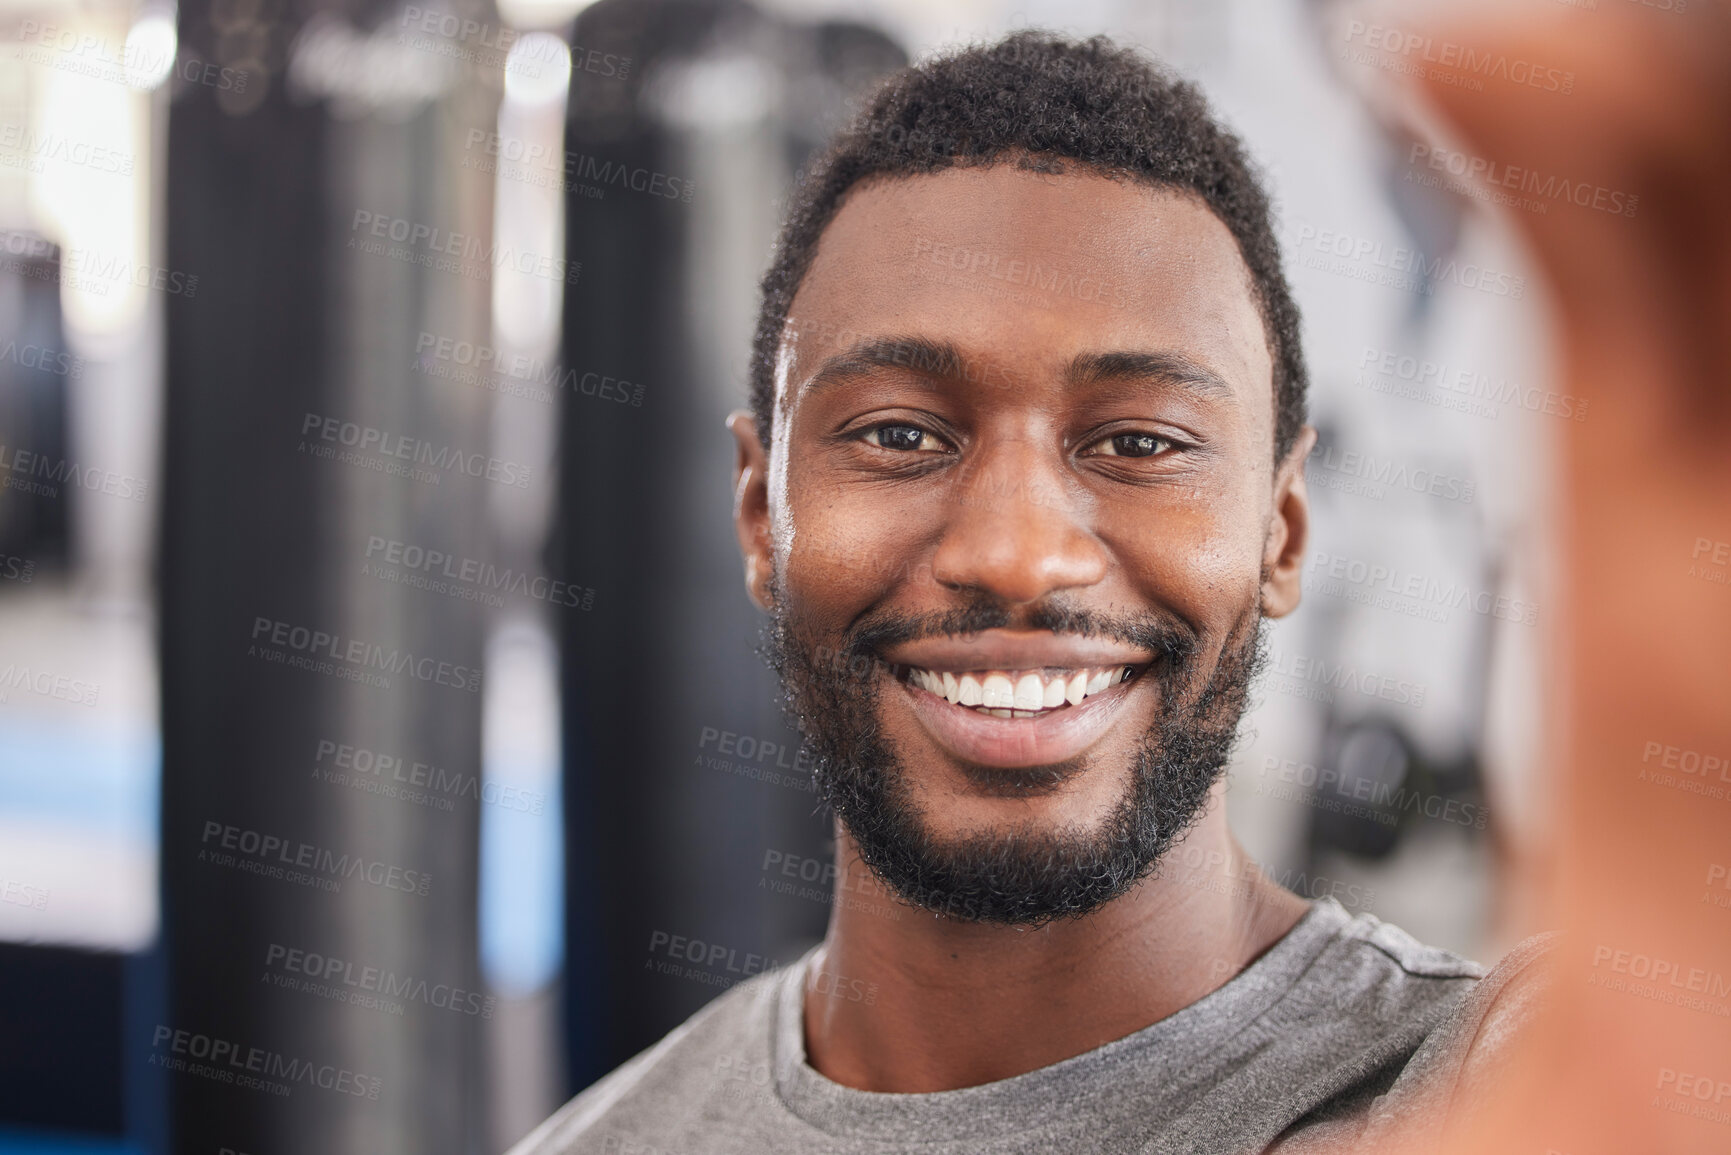 Buy stock photo Gym, wellness and workout selfie of black man in Chicago, USA ready for healthy lifestyle exercise. Fitness, training and health club photograph of person excited for cardio session with smile.